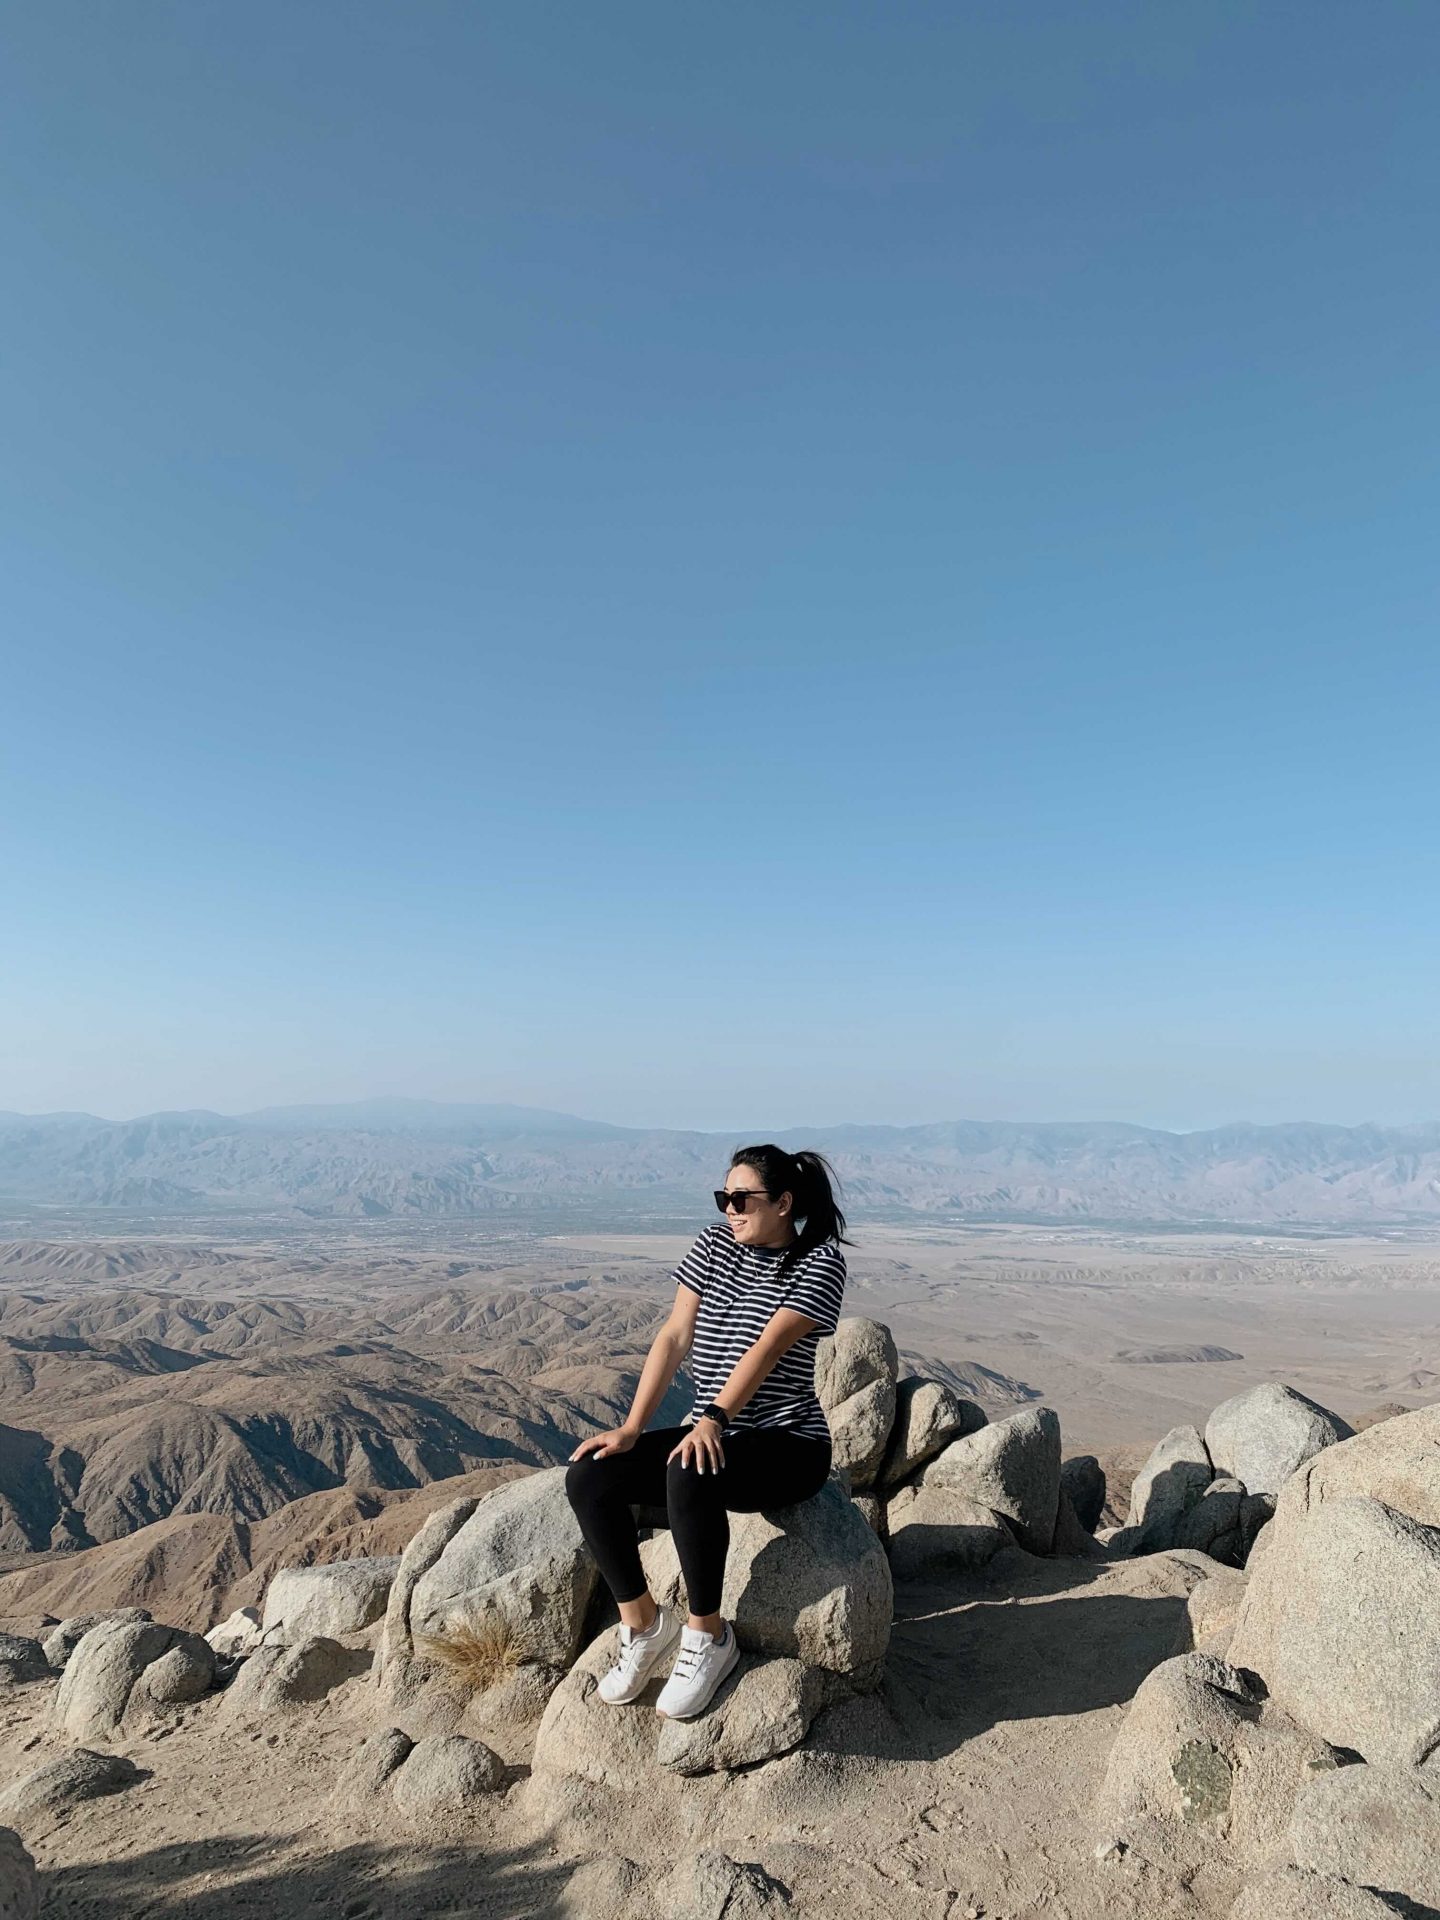 Blogger Summer Lee With Love, Summer at Keys View in Joshua Tree National Park